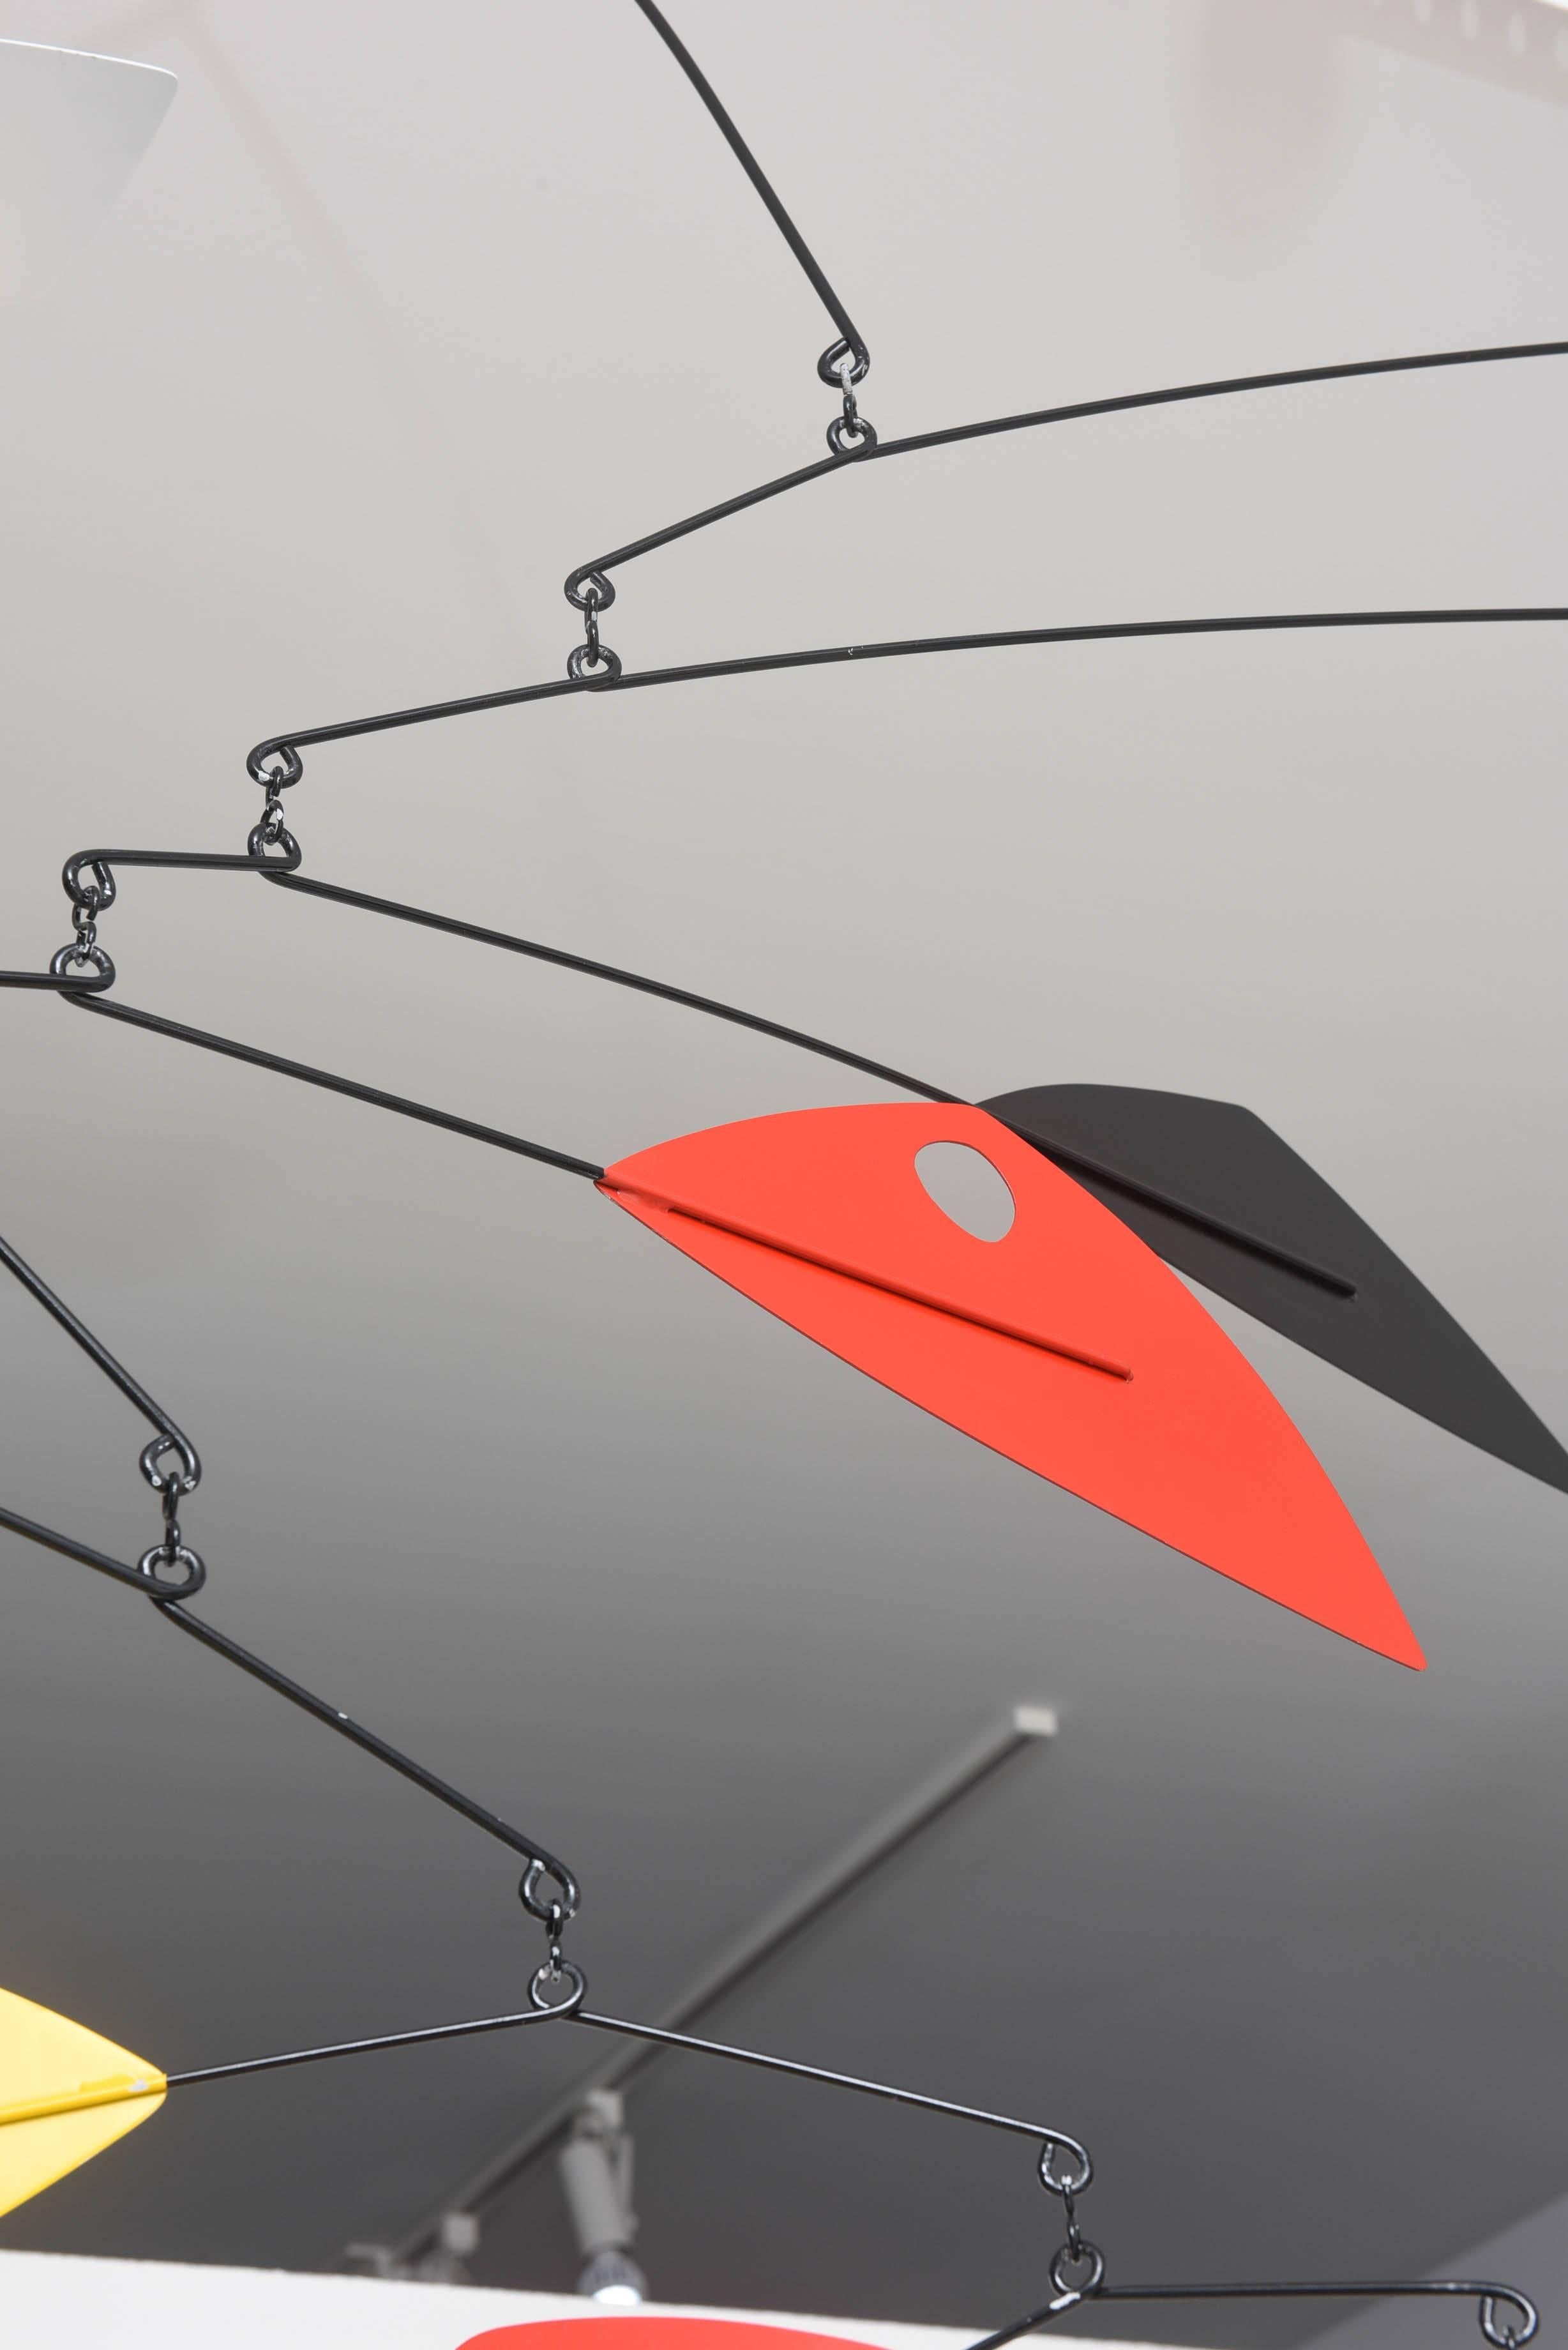 Modern Multi-Colored Mobile in the Manner of Alexander Calder, American, 20th Century